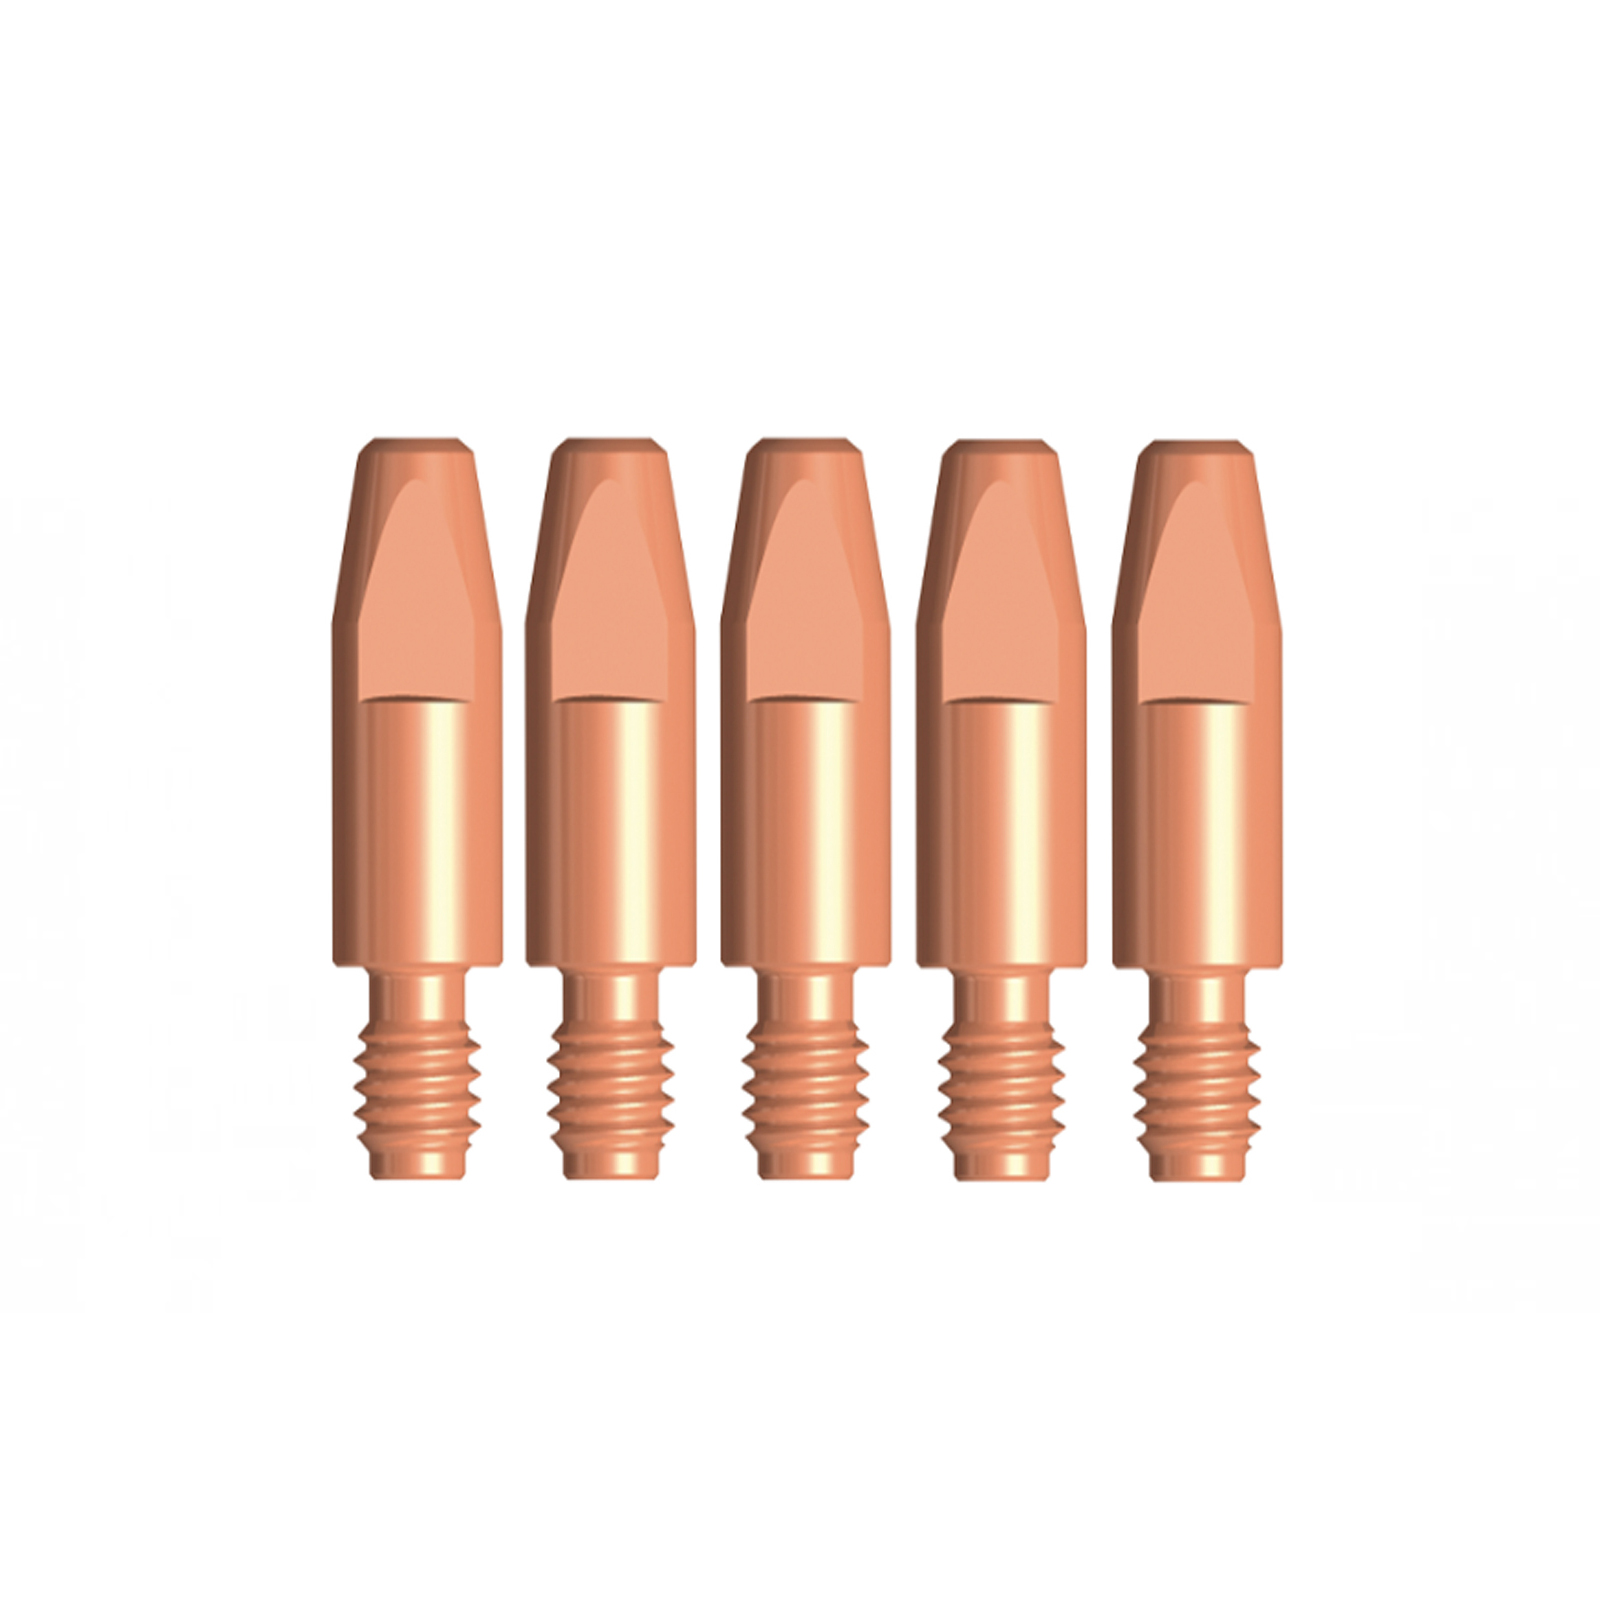 250A M6 PACK OF 10 MIG WELDING CONTACT TIPS 0.8mm,1.0mm OR 1.2mm 